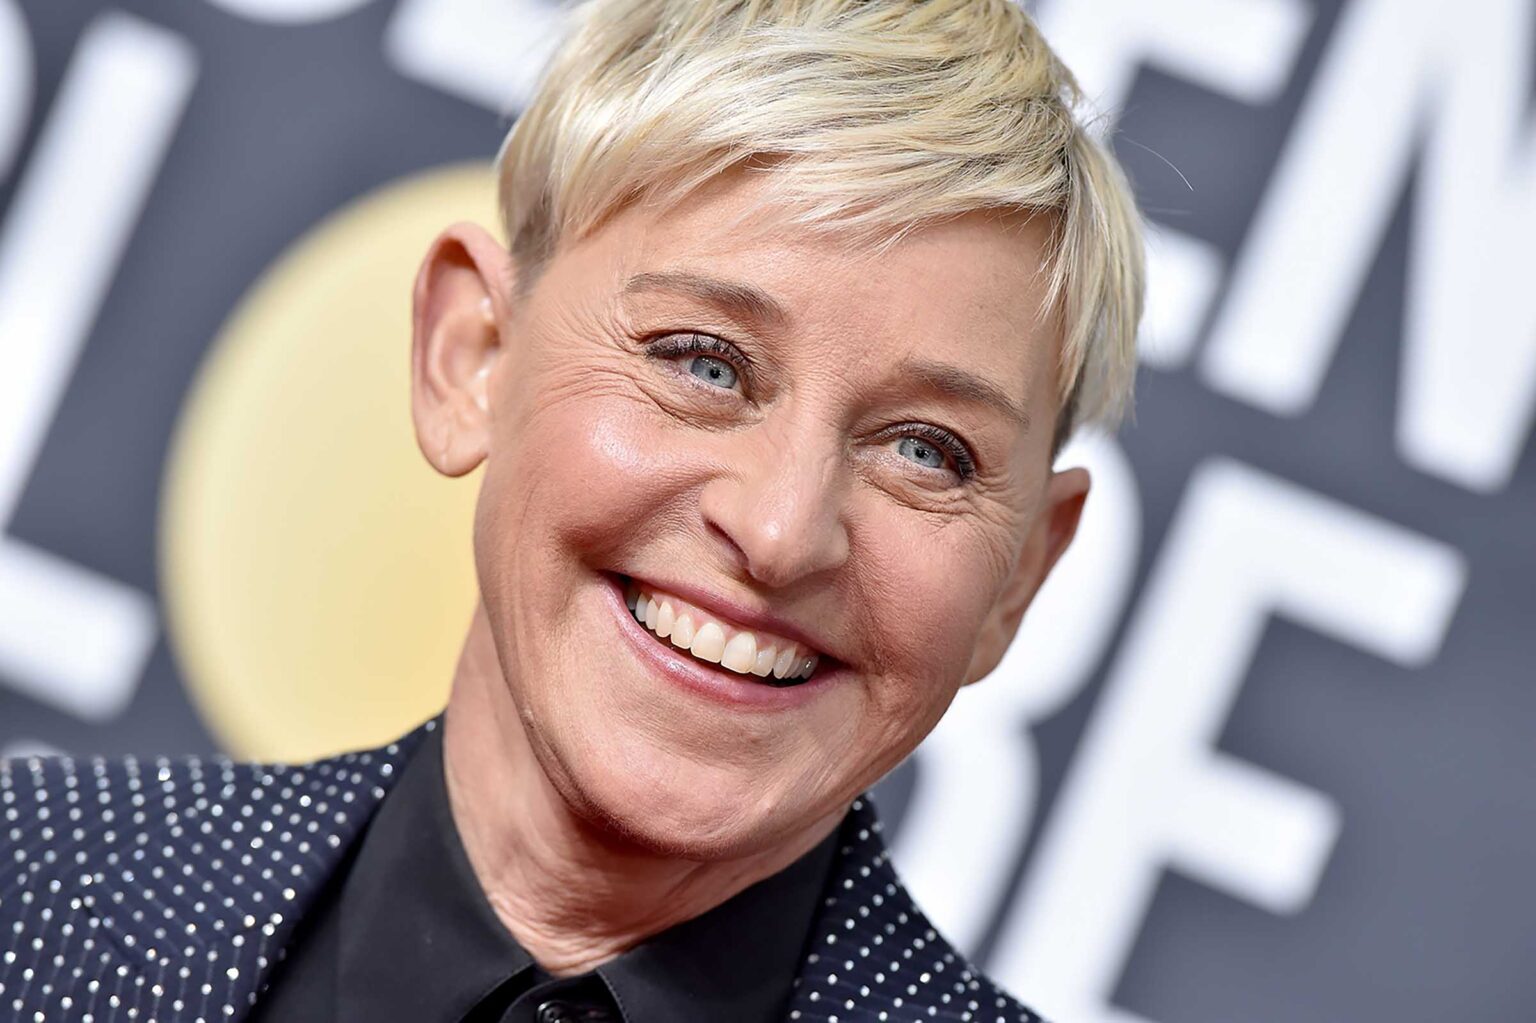 With how insane some of the accusations against Ellen DeGeneres are, it has people wondering, was she always this mean?